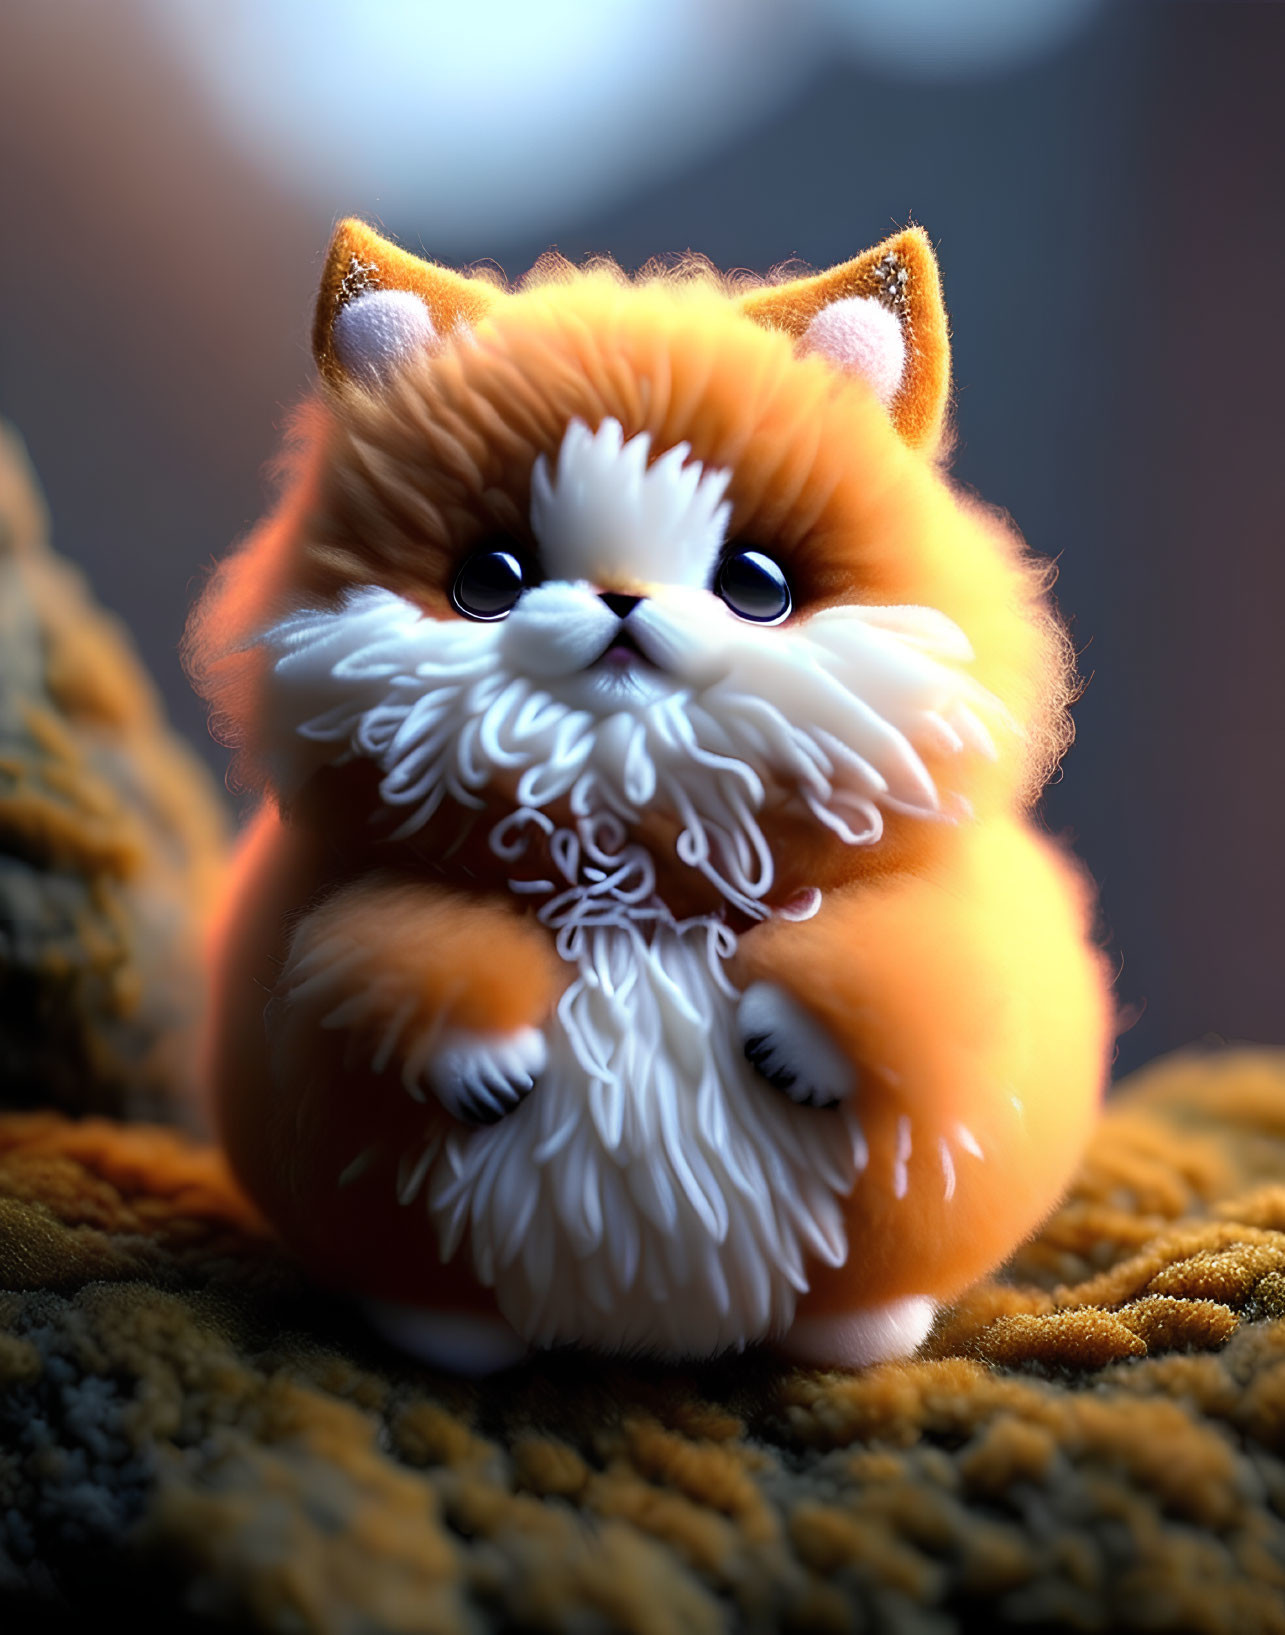 Fluffy Orange and White Fantasy Kitten with Blue Eyes on Mossy Surface